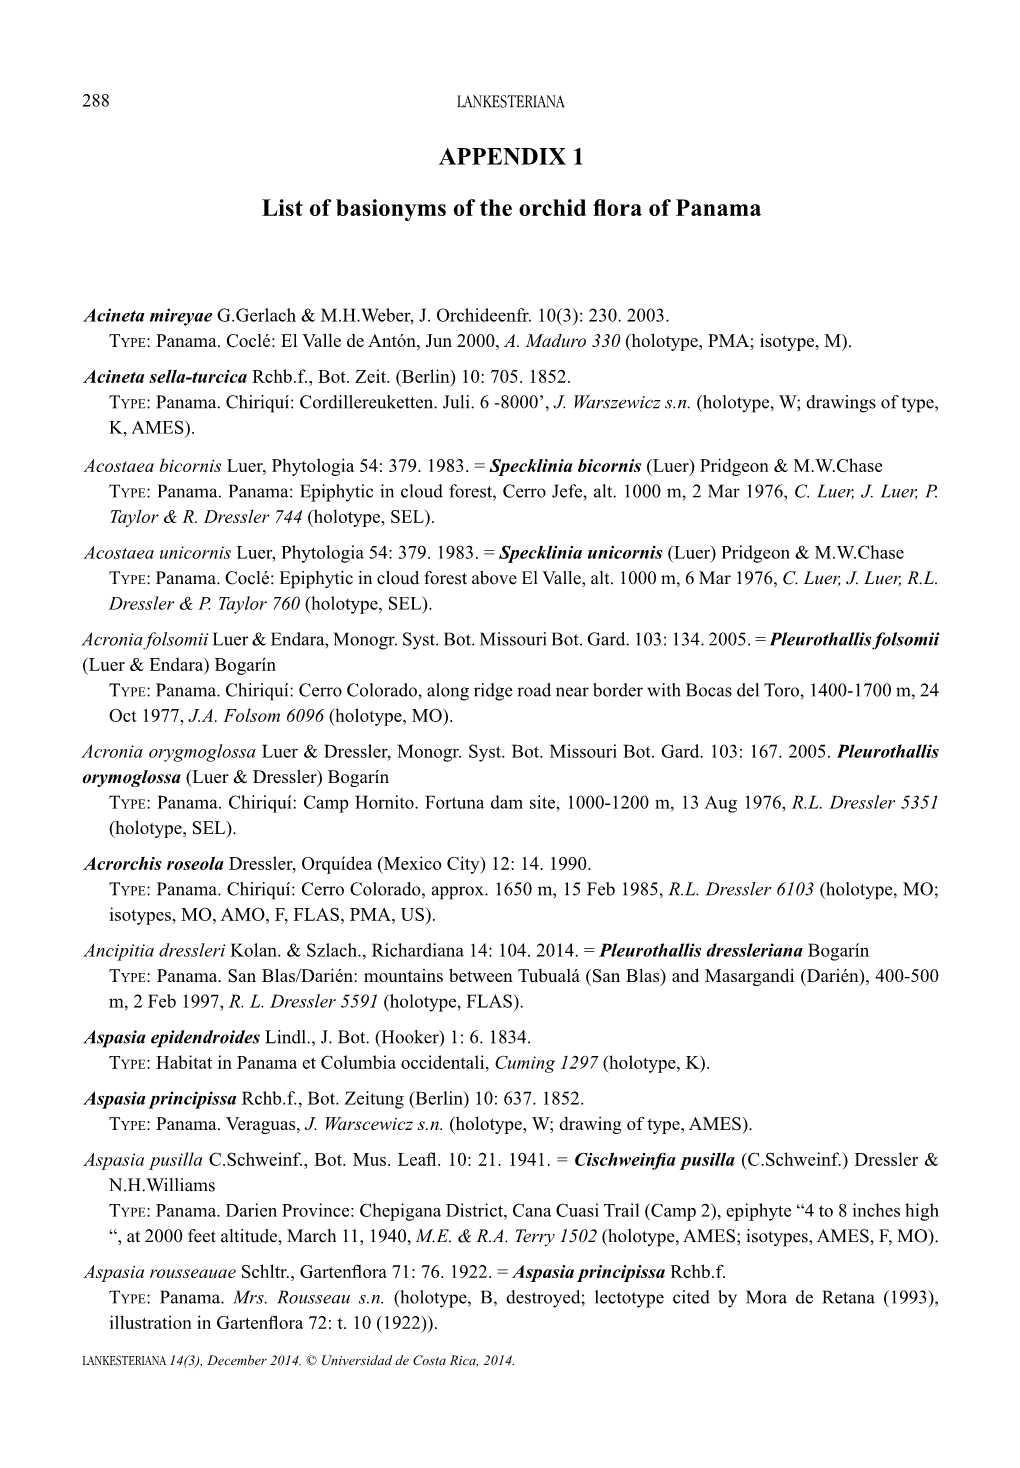 APPENDIX 1 List of Basionyms of the Orchid Flora of Panama